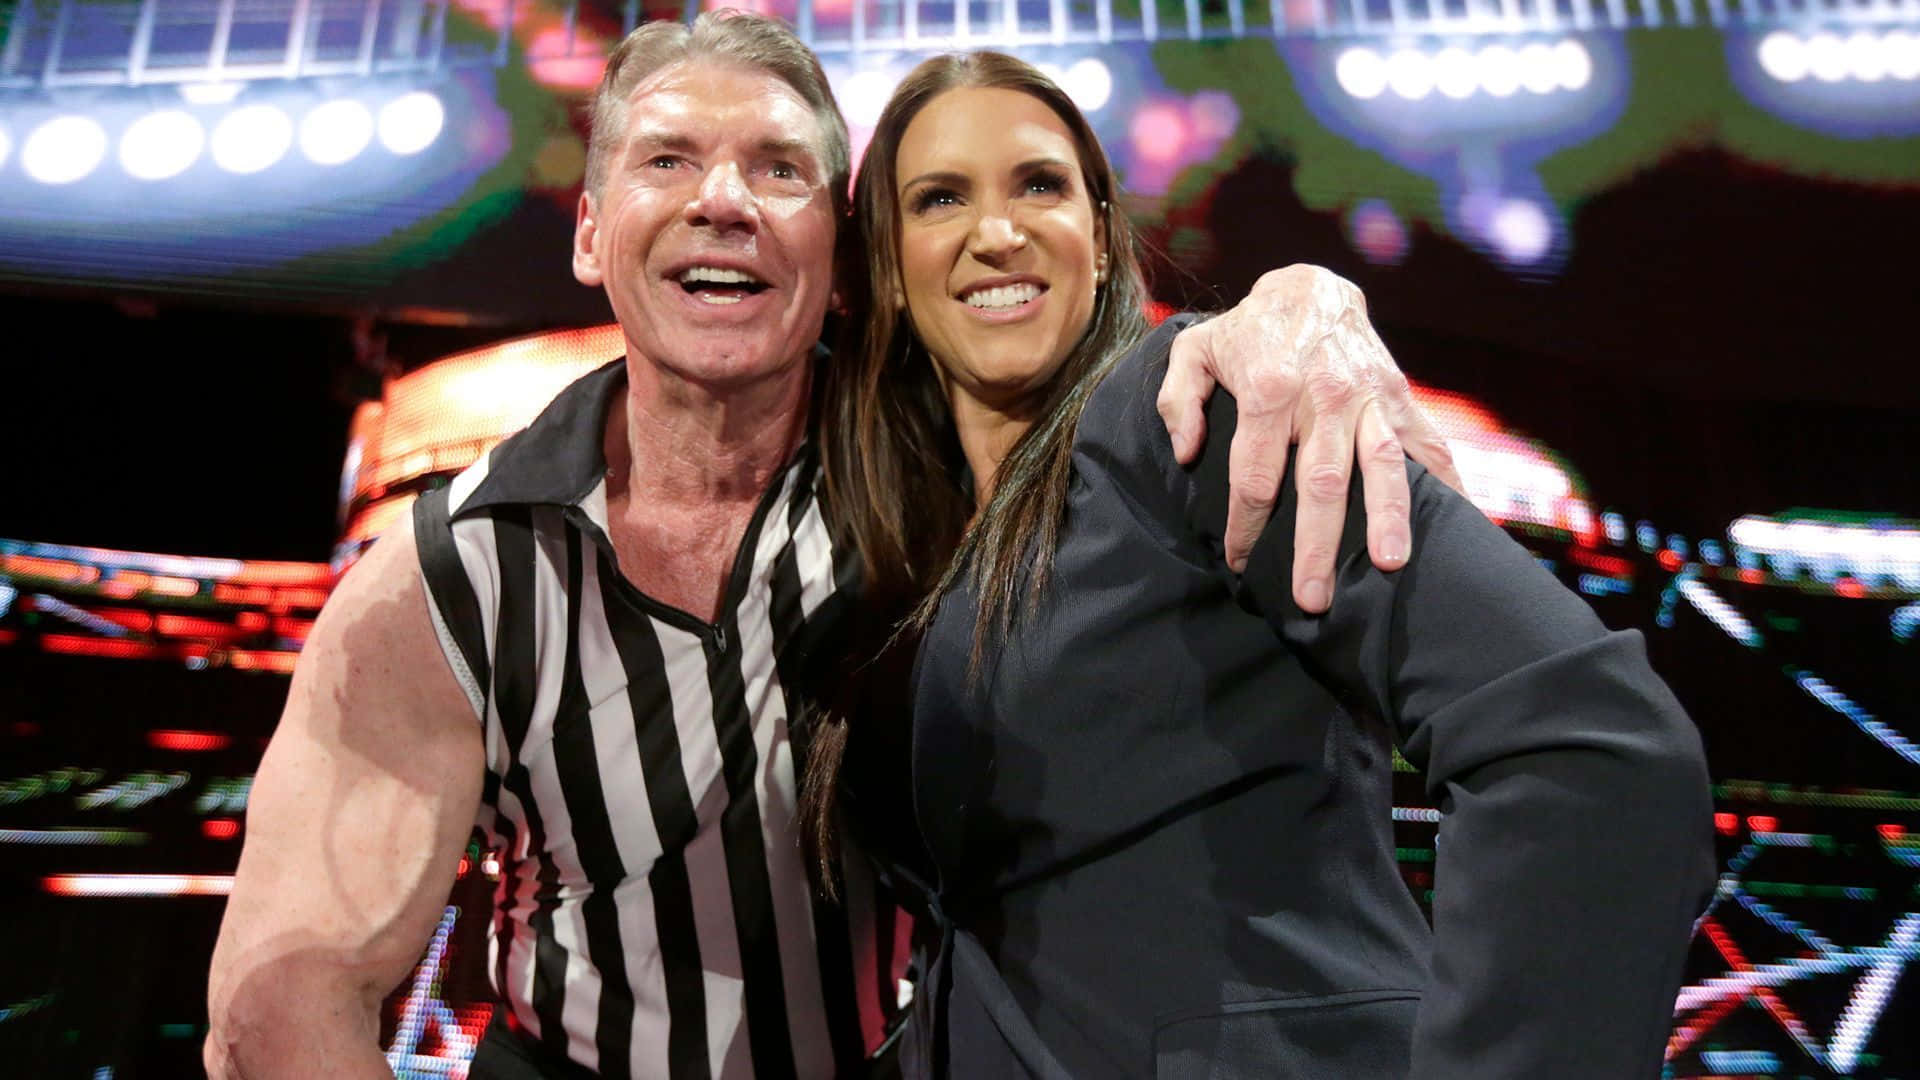 Vince Mcmahon And Stephanie Mcmahon Share A Moment Together